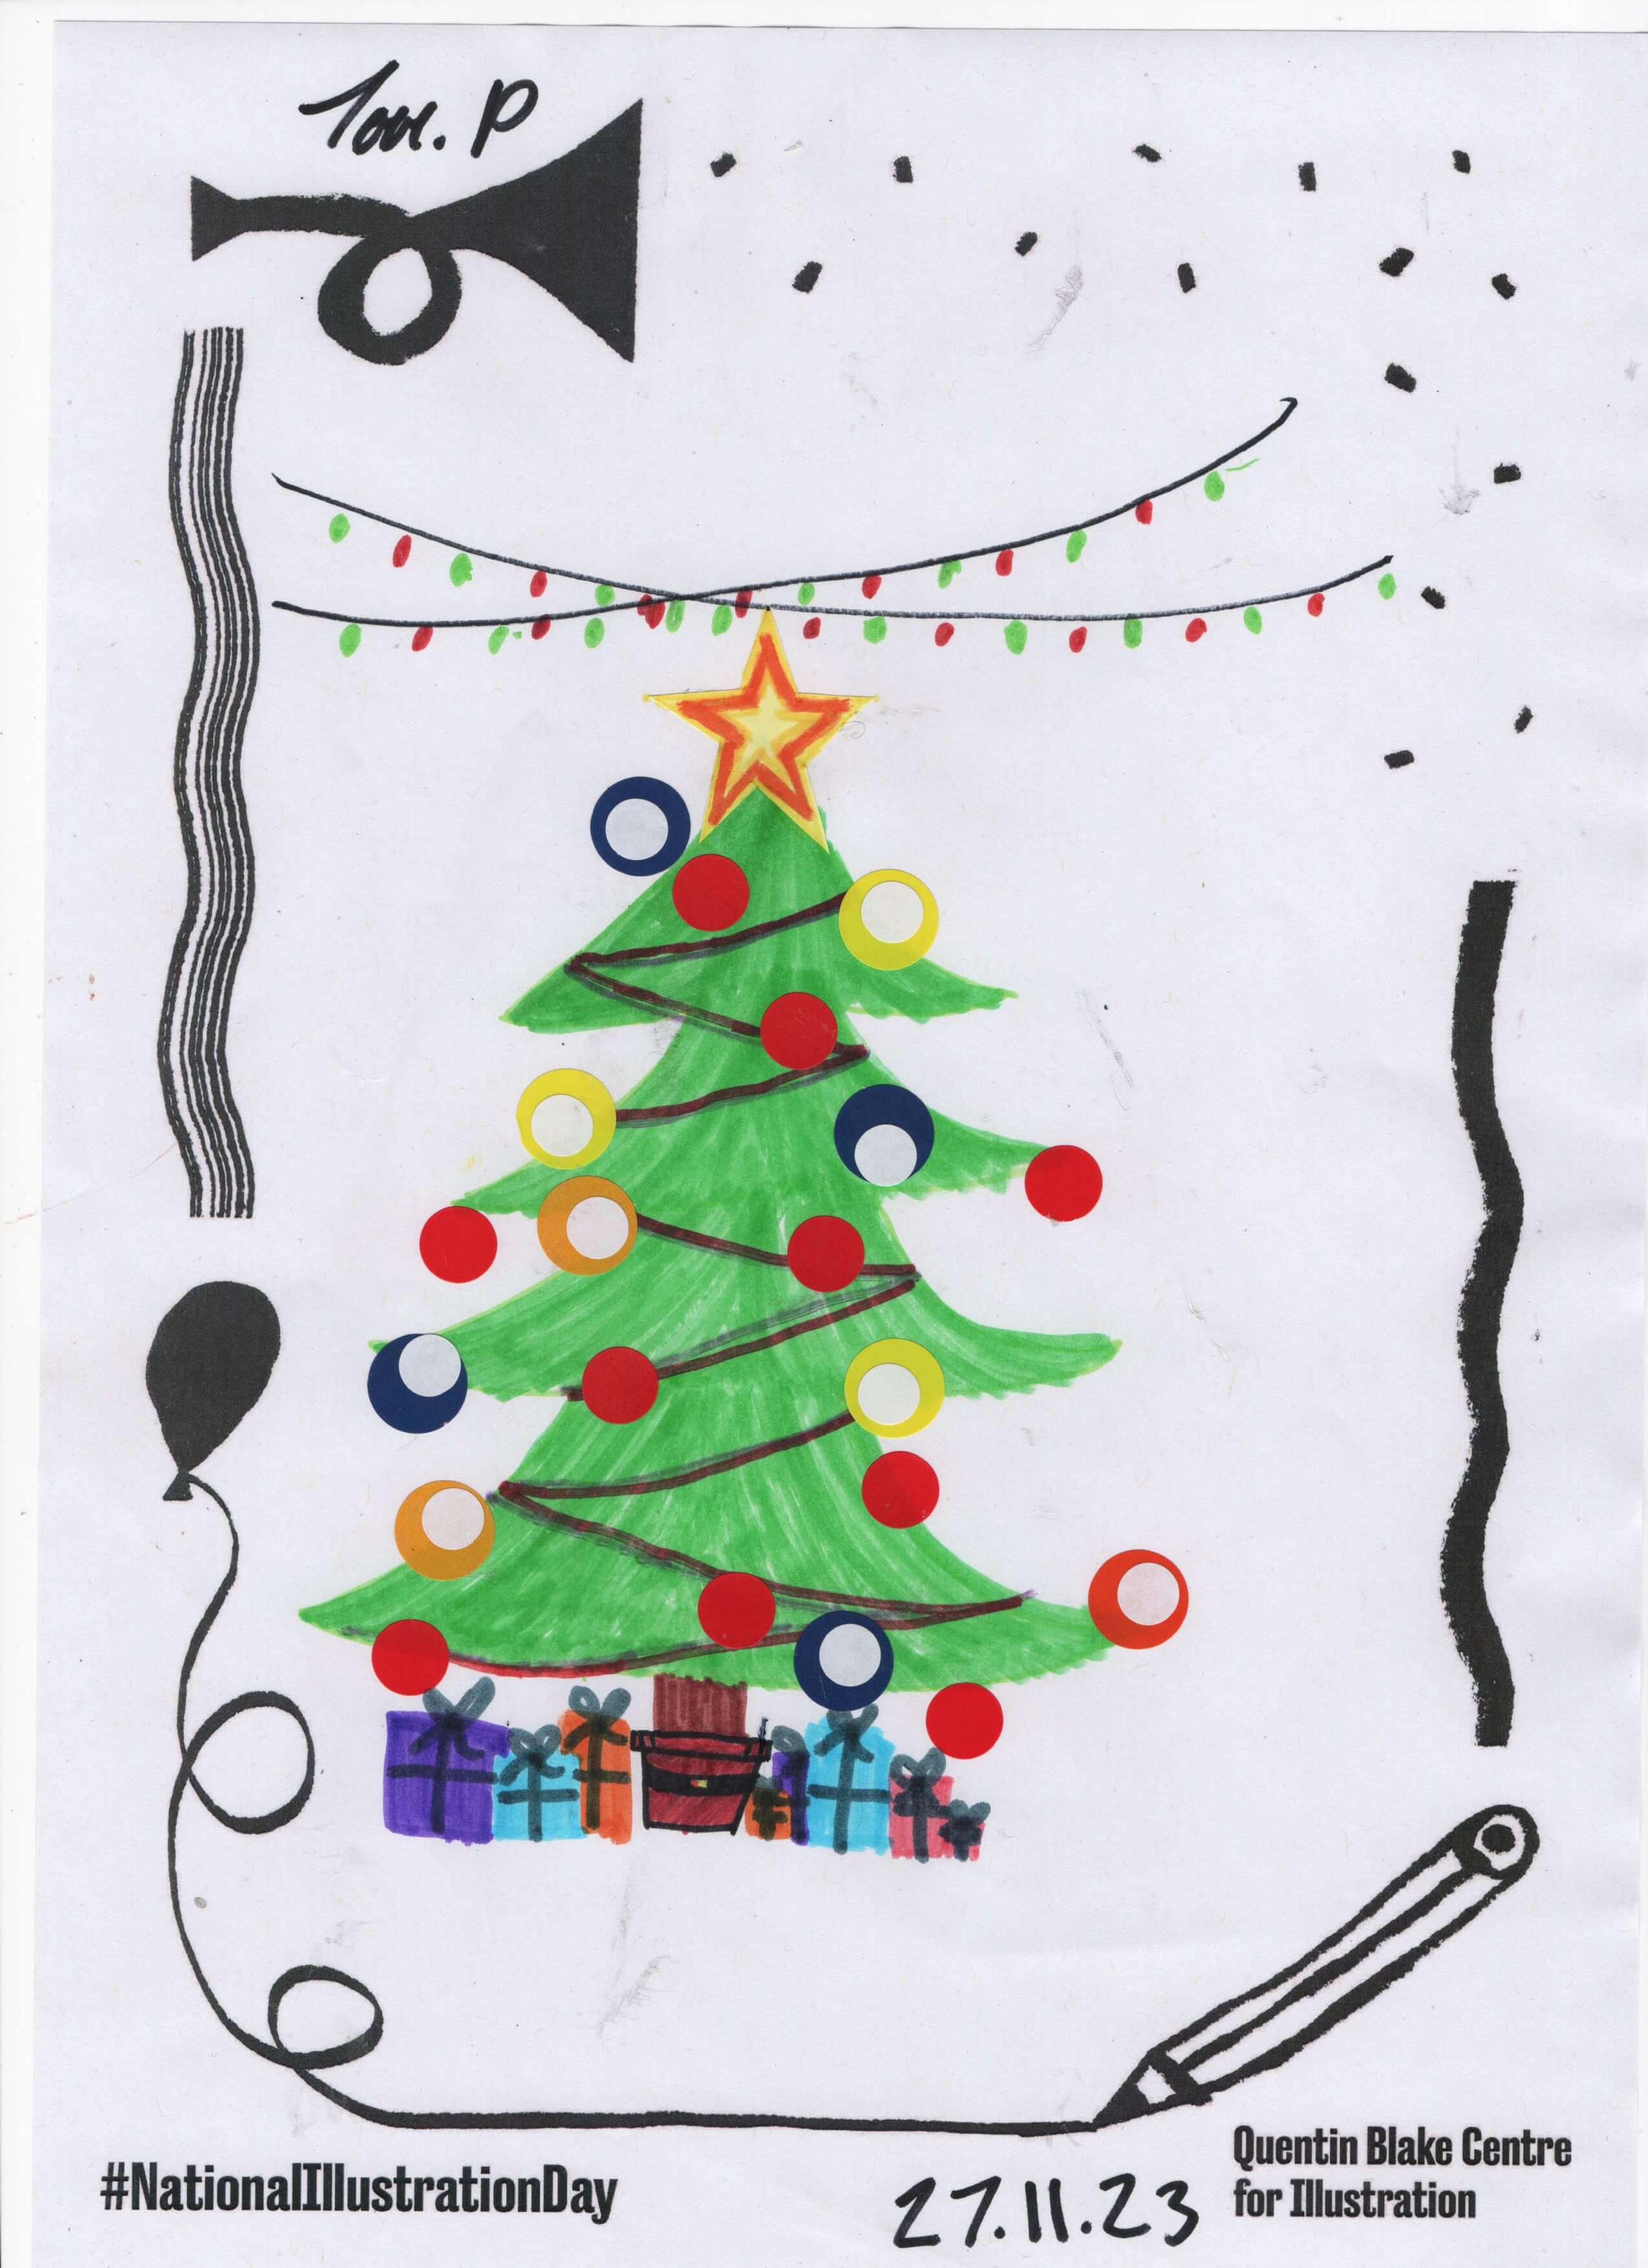 Coloured illustration of a decorated Christmas tree with presents underneath and coloured lights in the background.